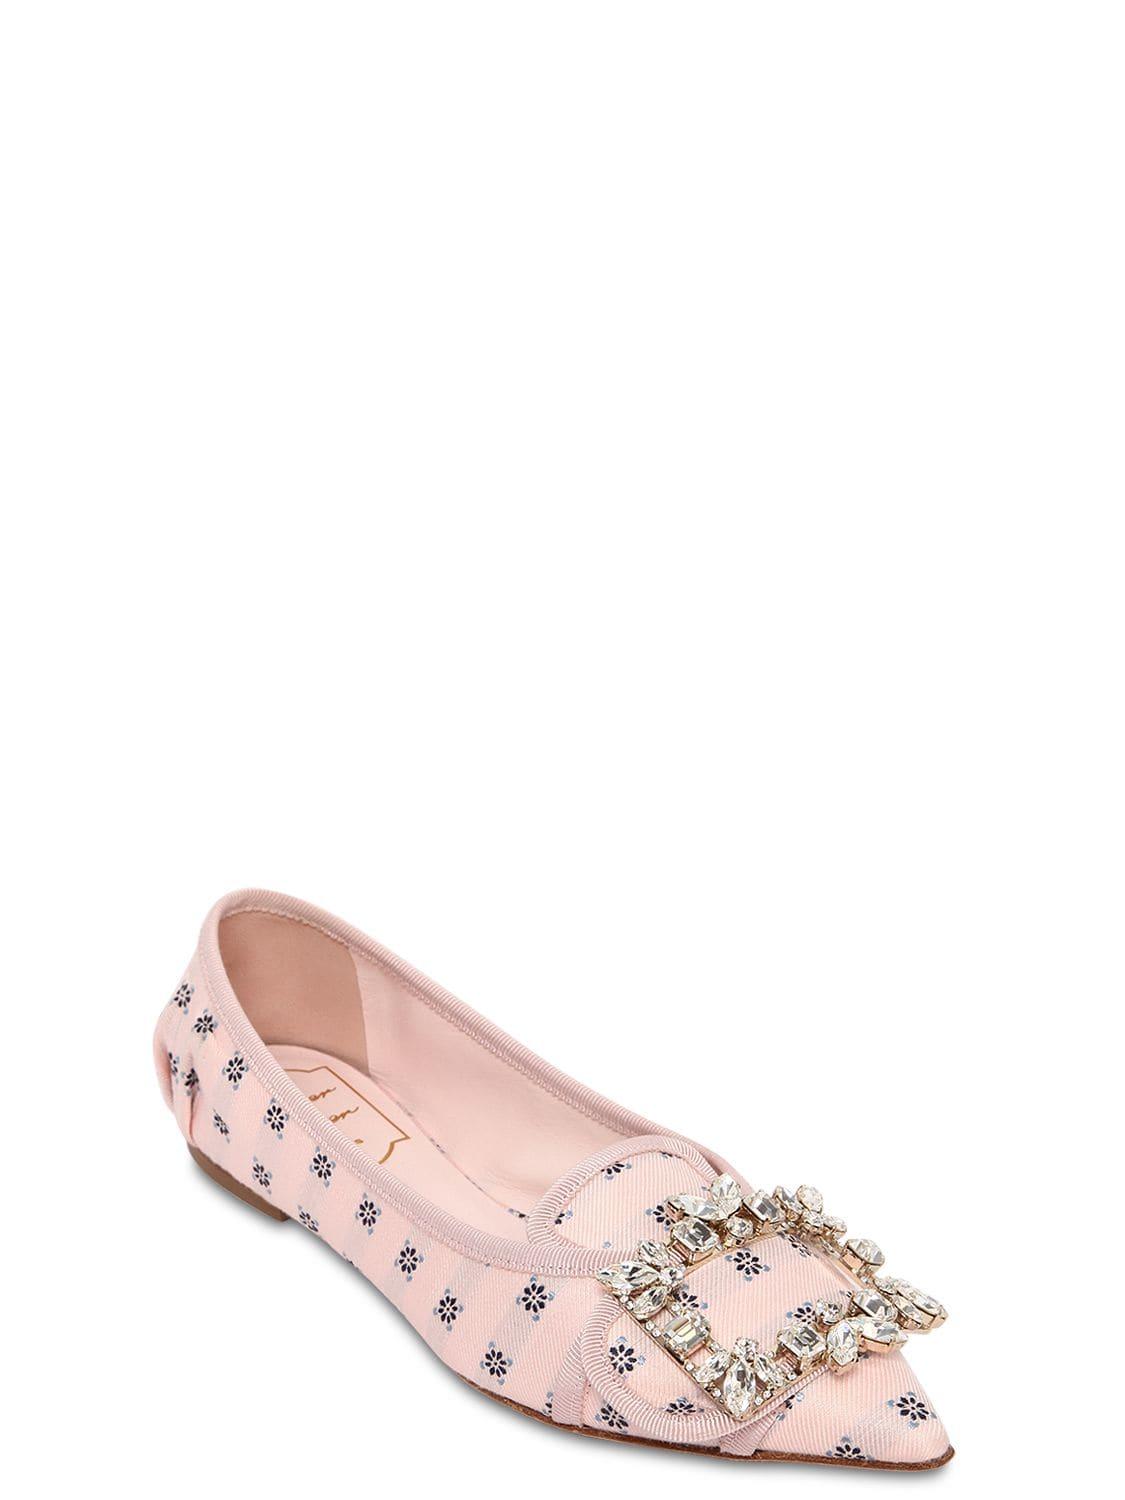 Roger Vivier Leather 10mm Buckle Printed Flats in Pink - Save 18 